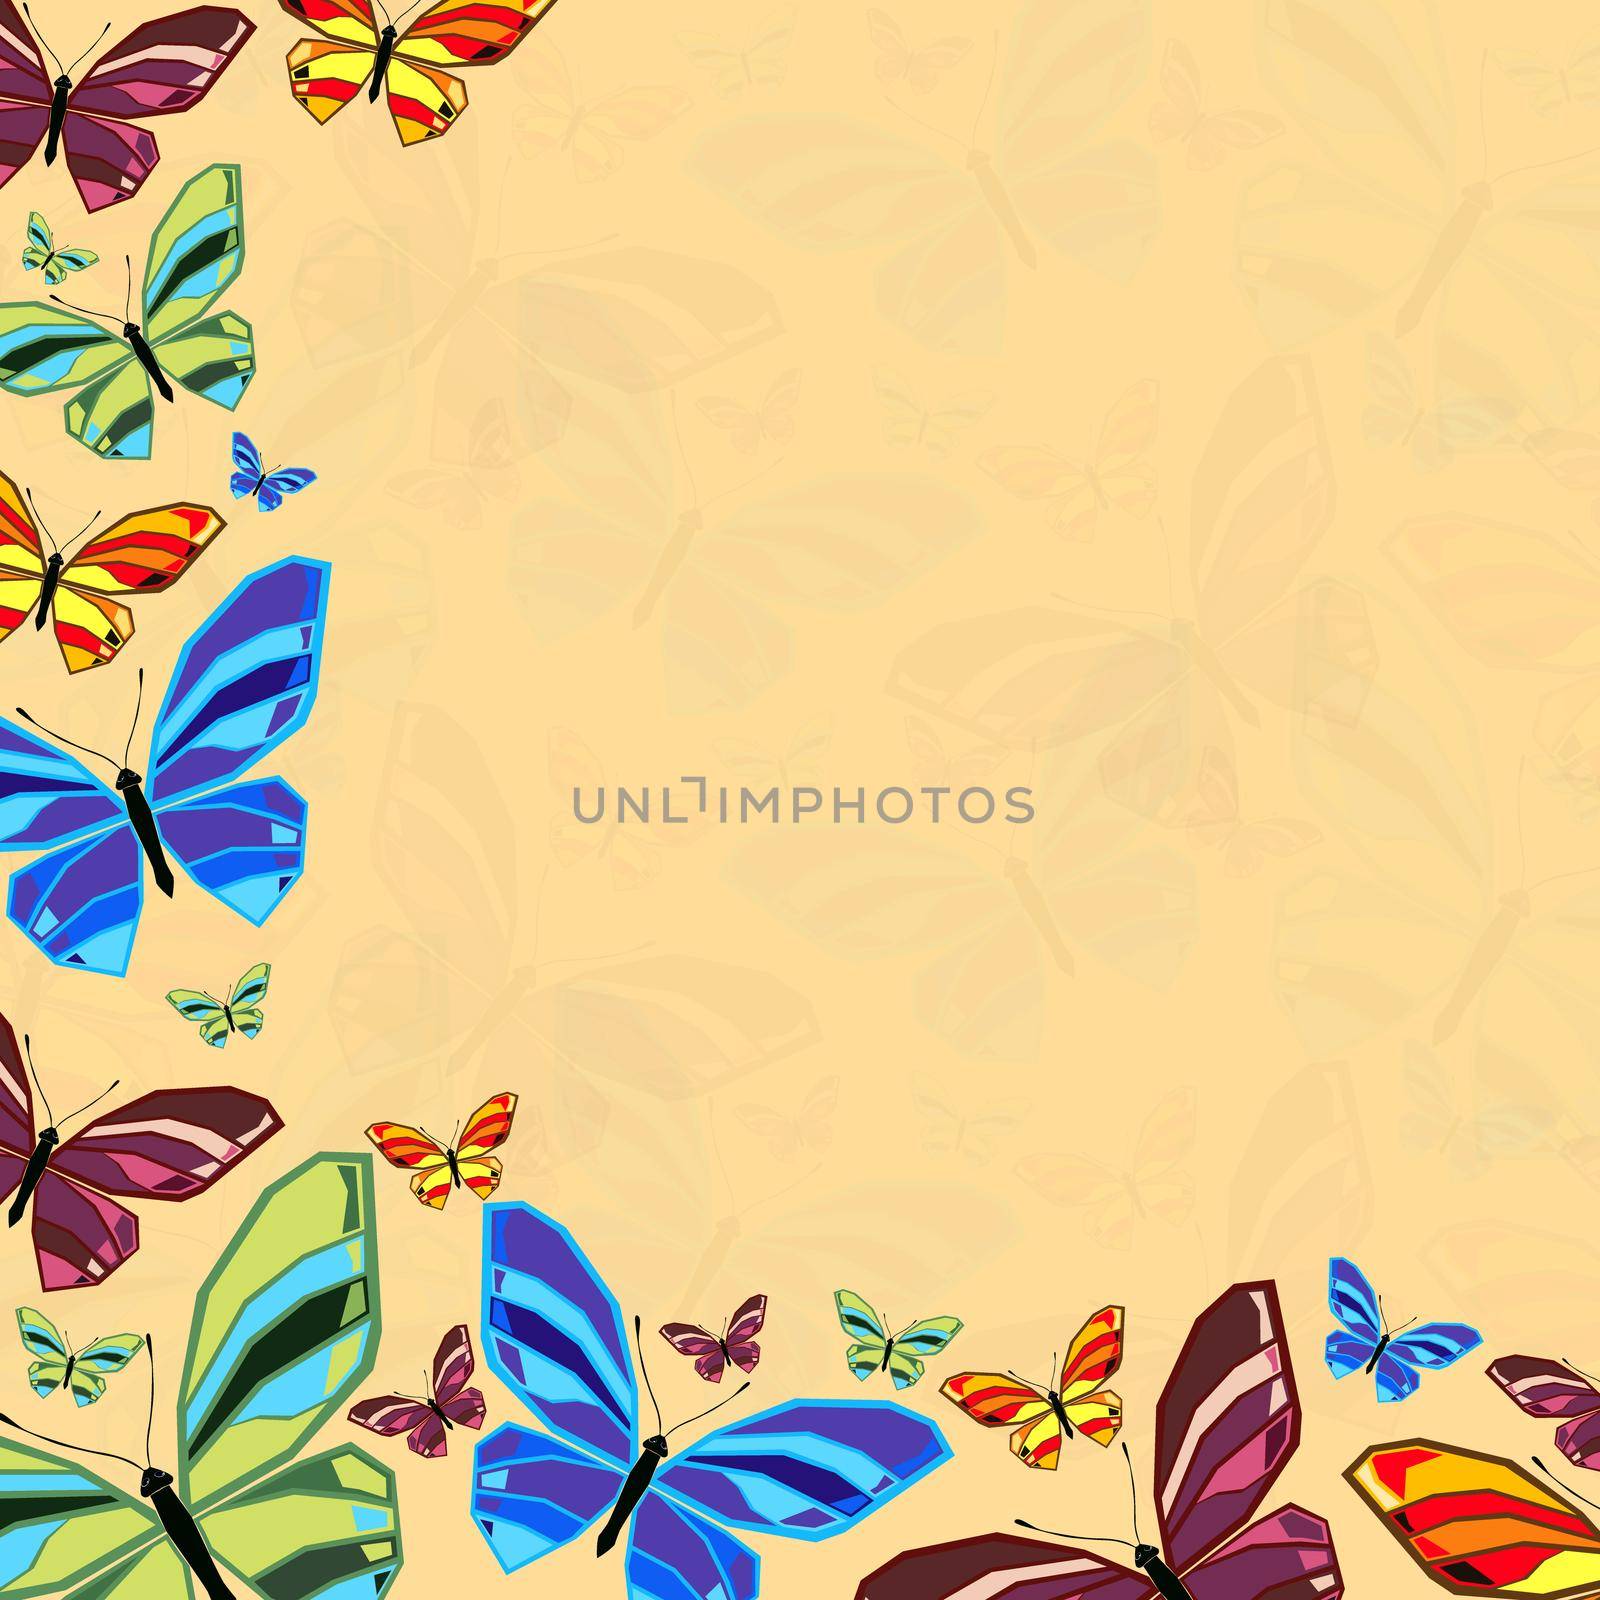 Postcard with abstract images of a butterfly. Colored vector illustration.